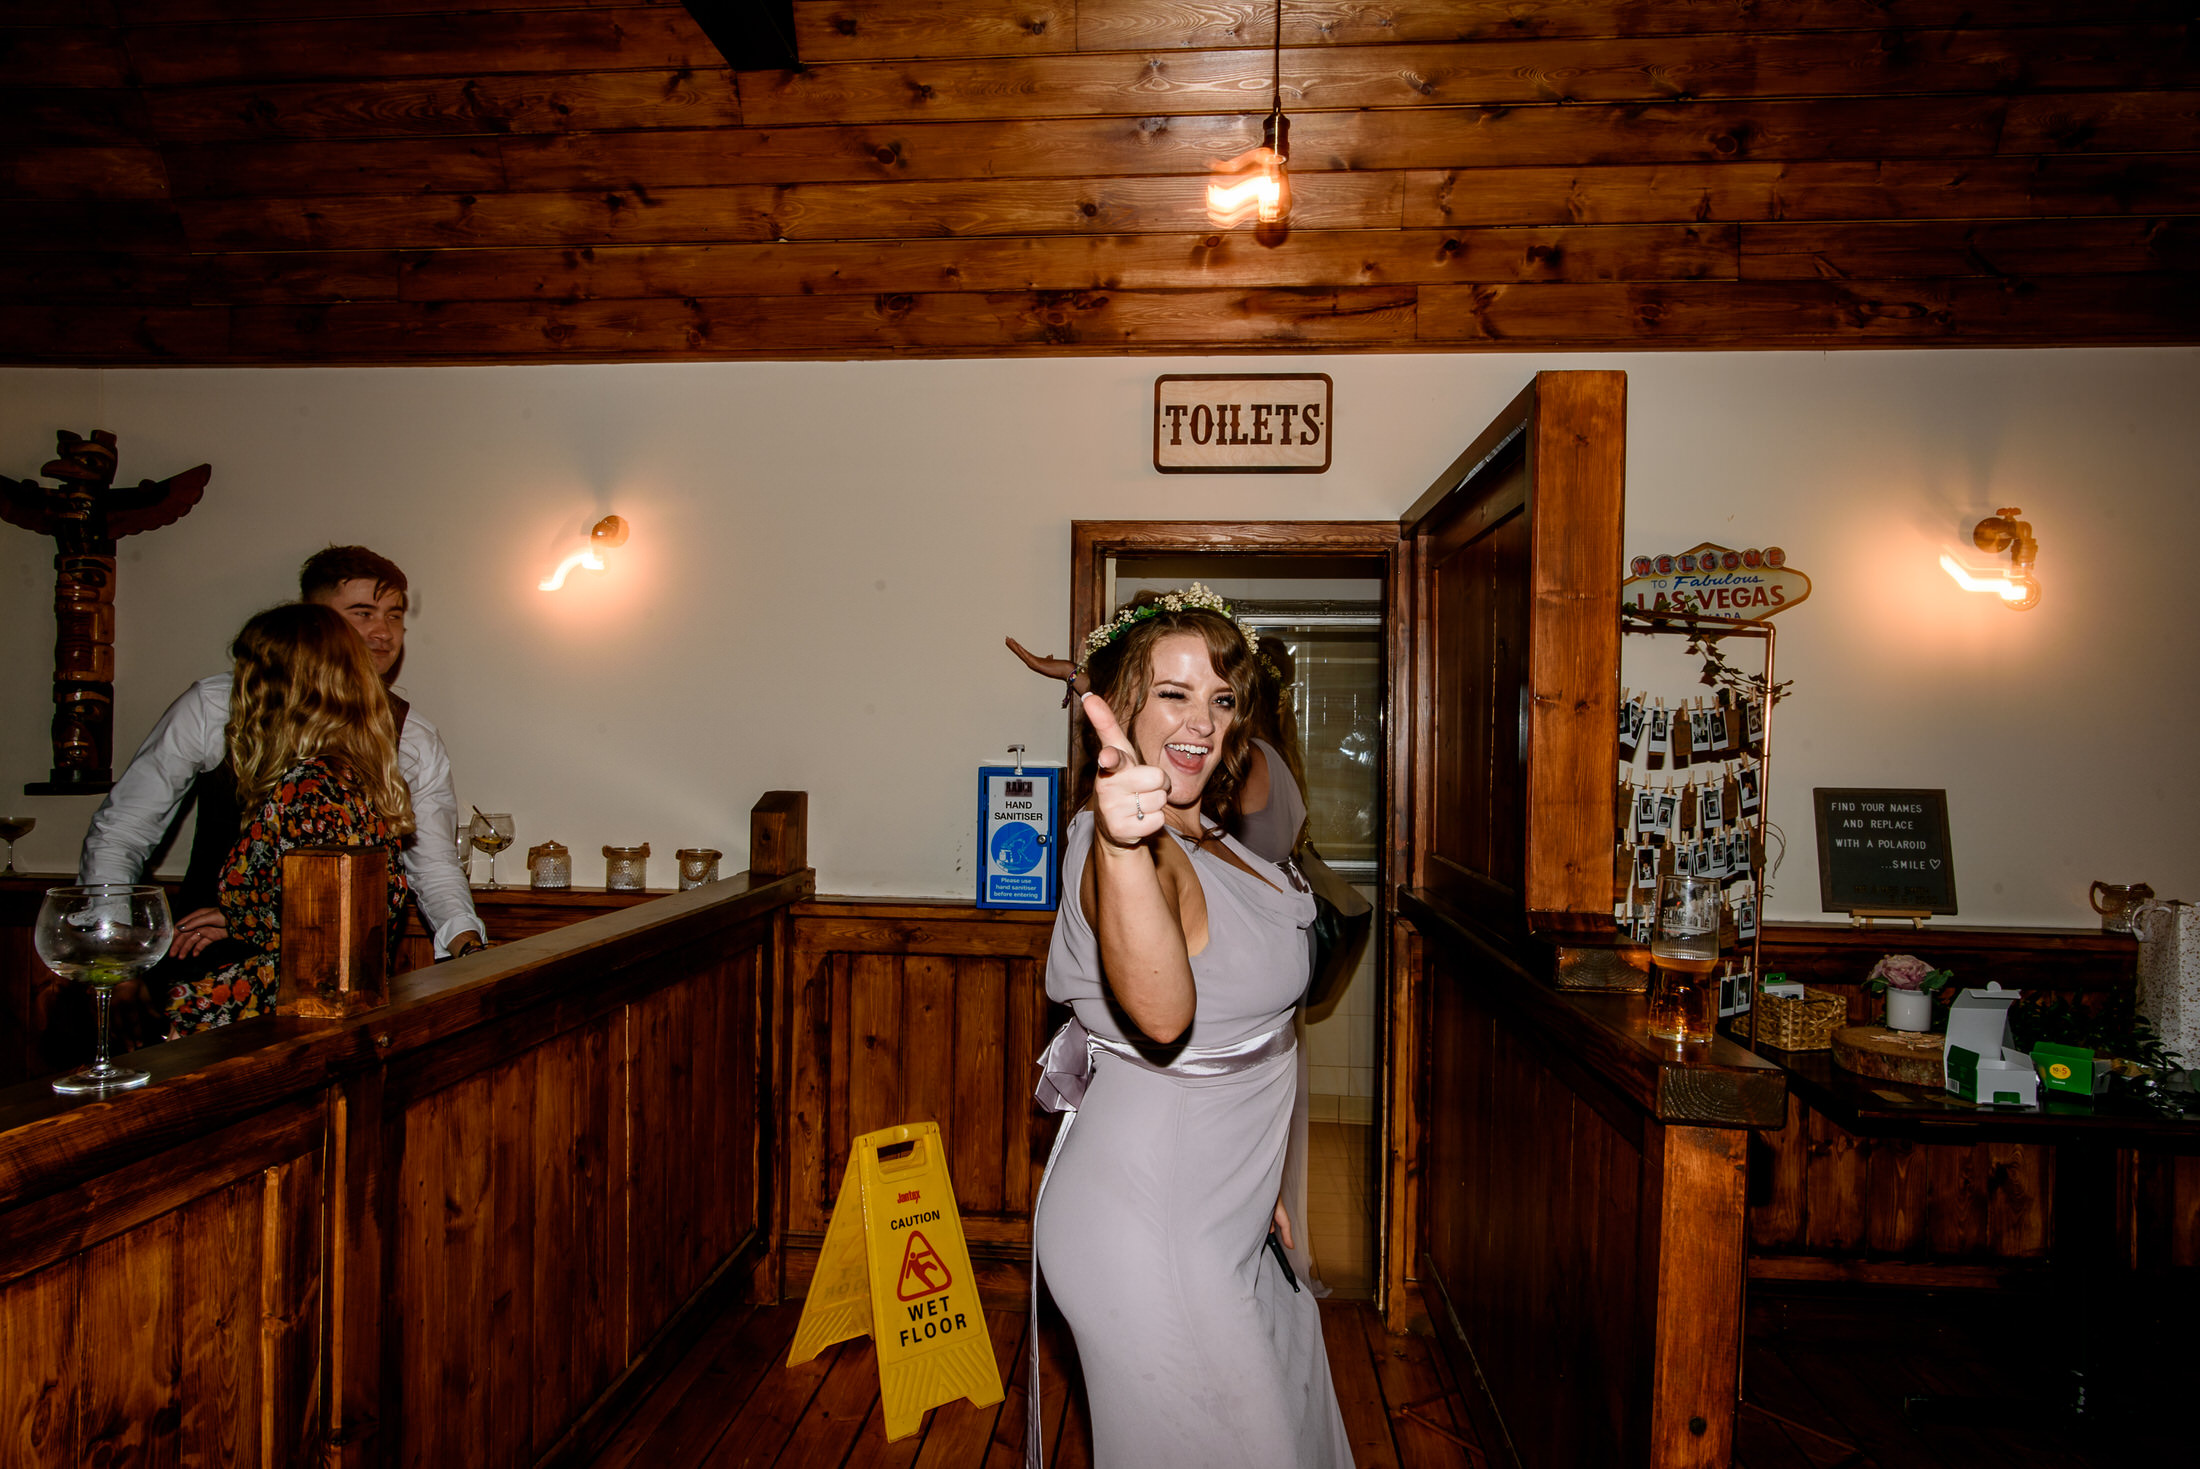 A woman in a wedding dress is posing for a picture in a bar.